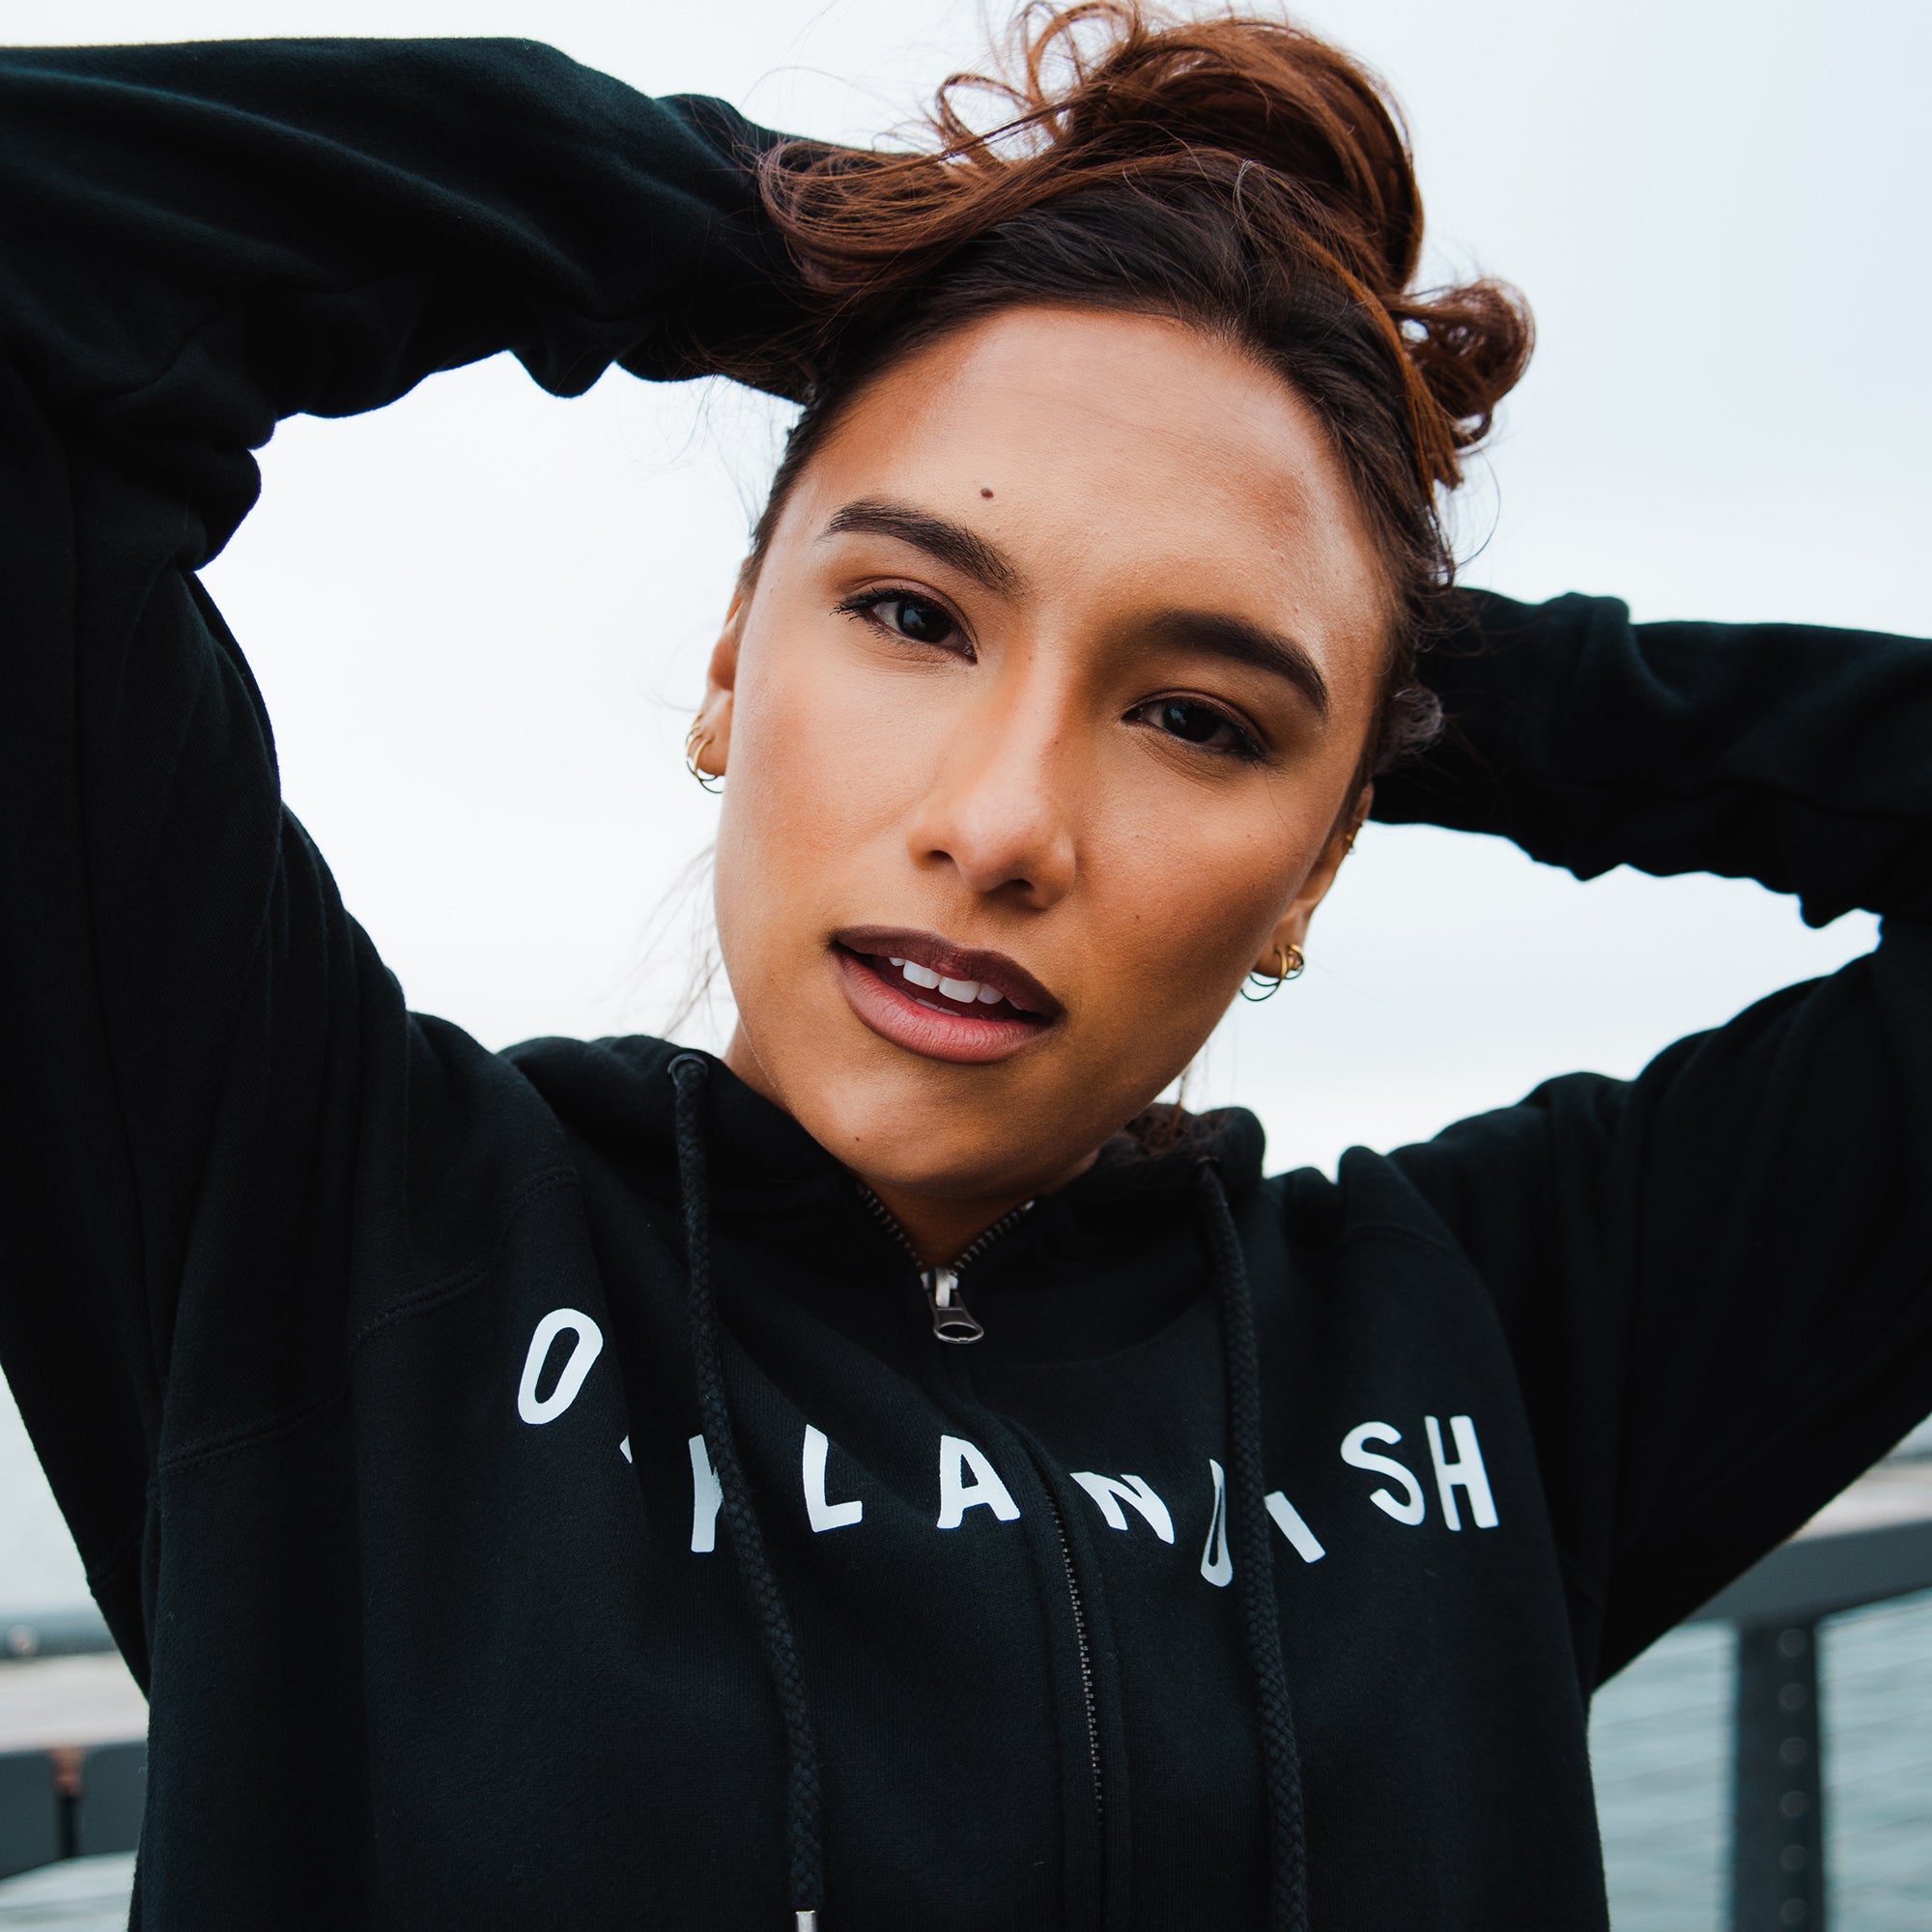 Close up of woman standing on a waterfront boardwalk wearing a black hooded sweatshirt with an Oaklandish wordmark on the chest.